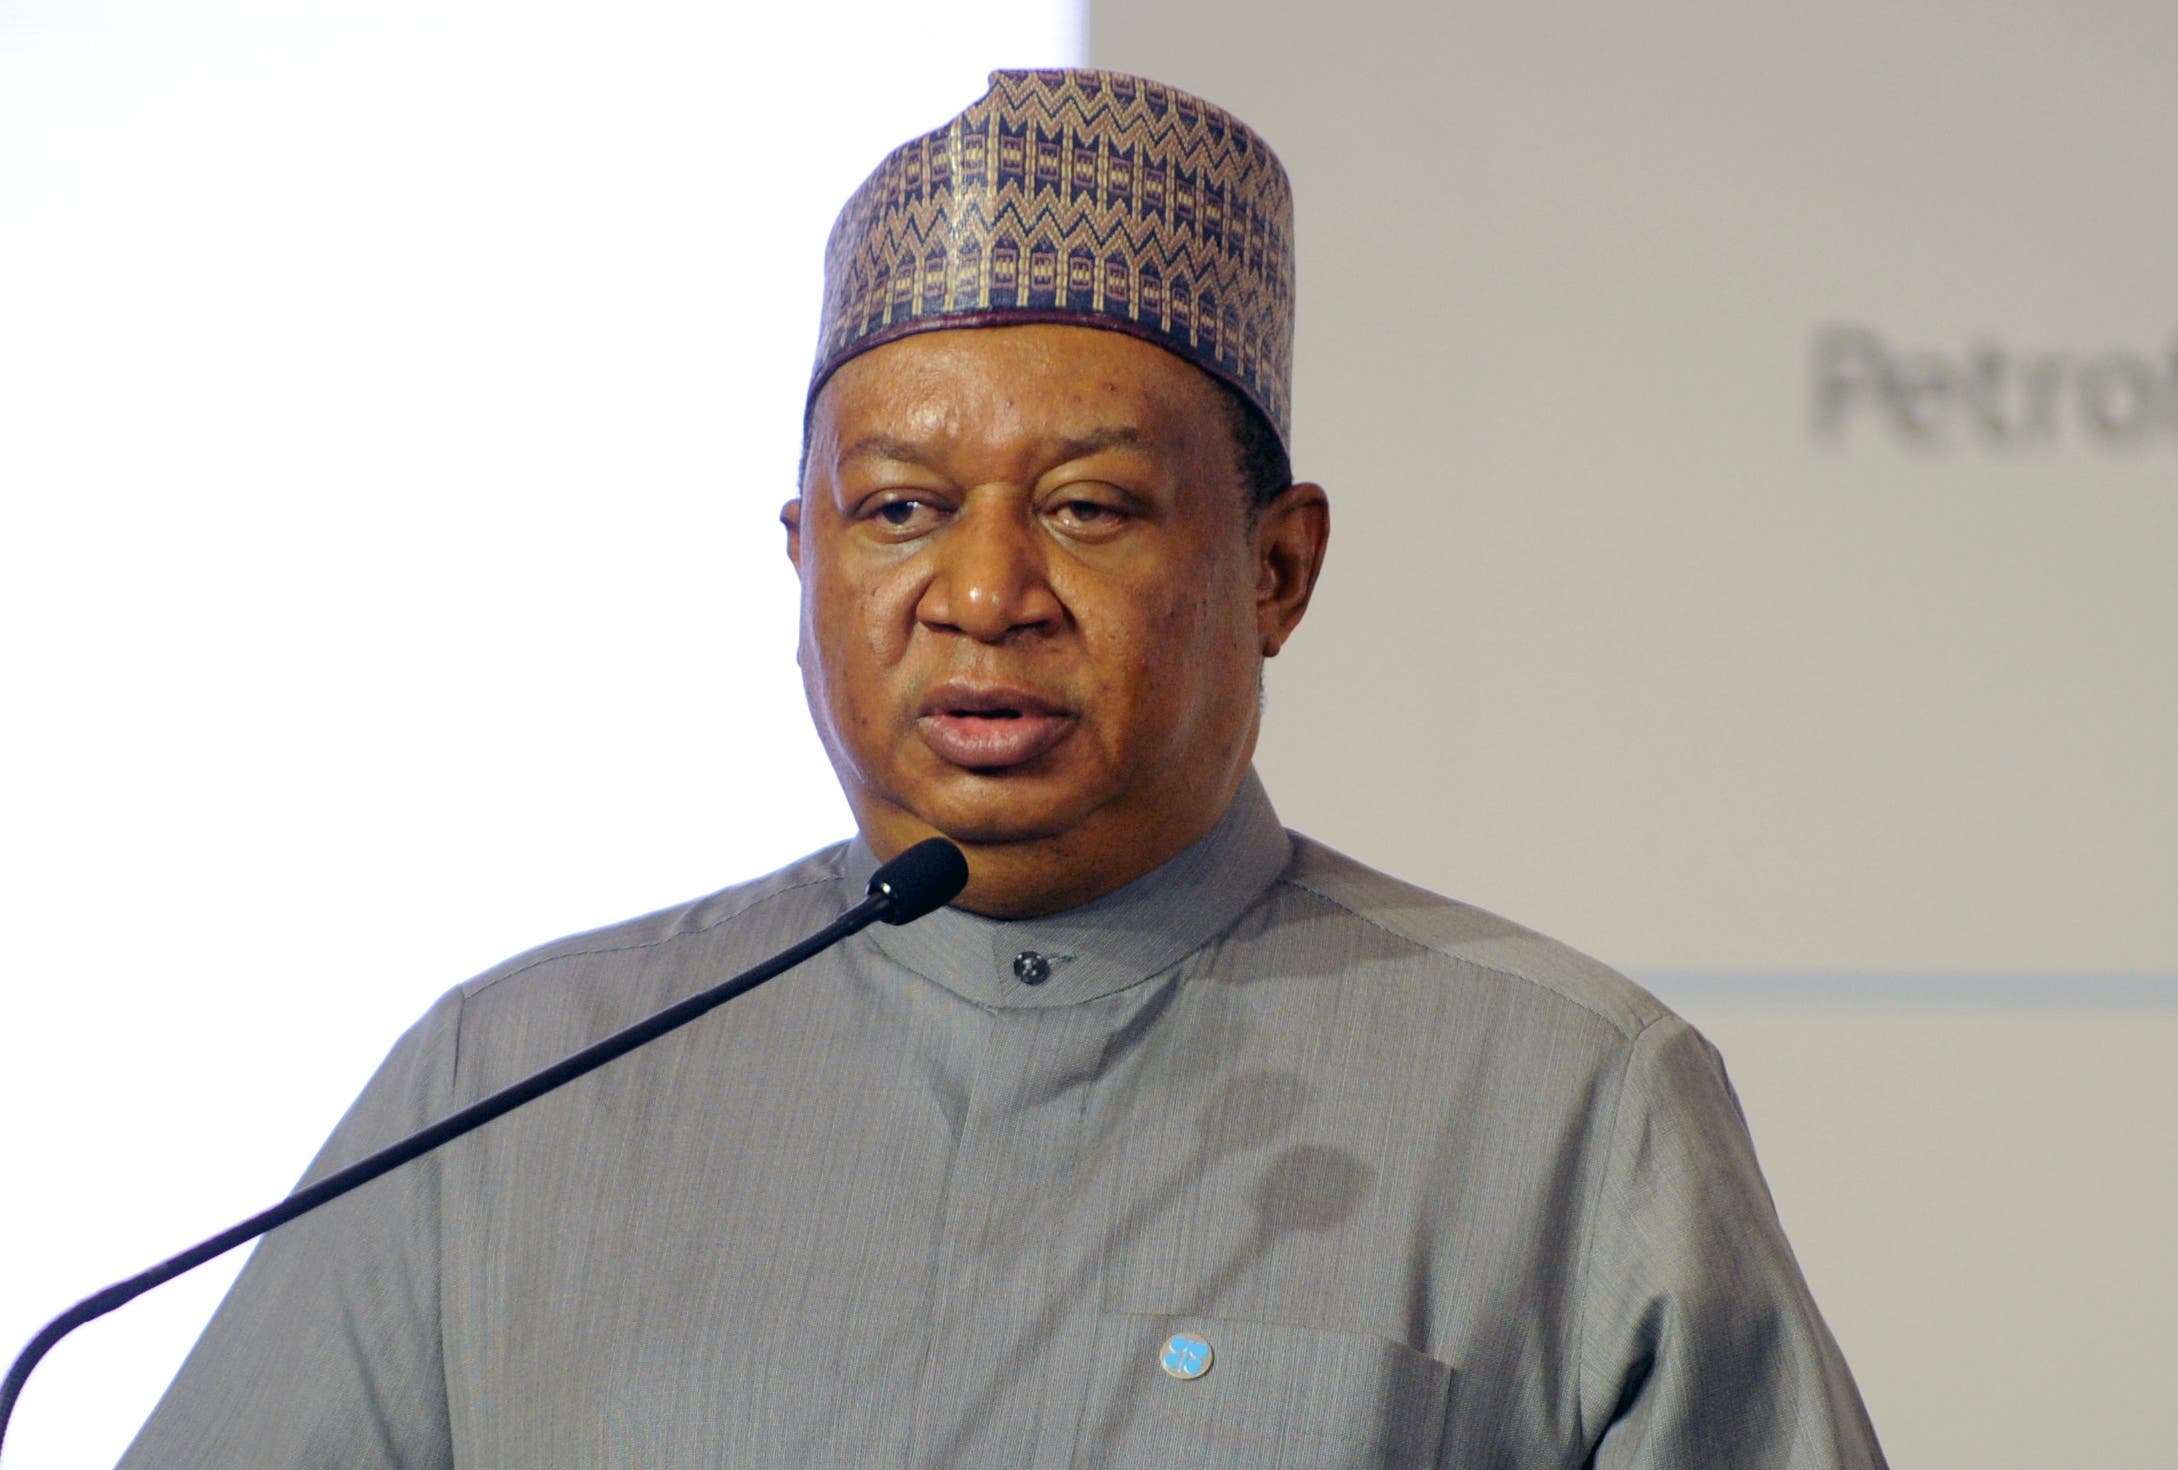 The secretary general of the Organization of Petroleum Exporting Countries (OPEC), Mohammed Barkindo, addresses an oil and gas conference held in Kuwait City on April 16, 2018. (AFP)